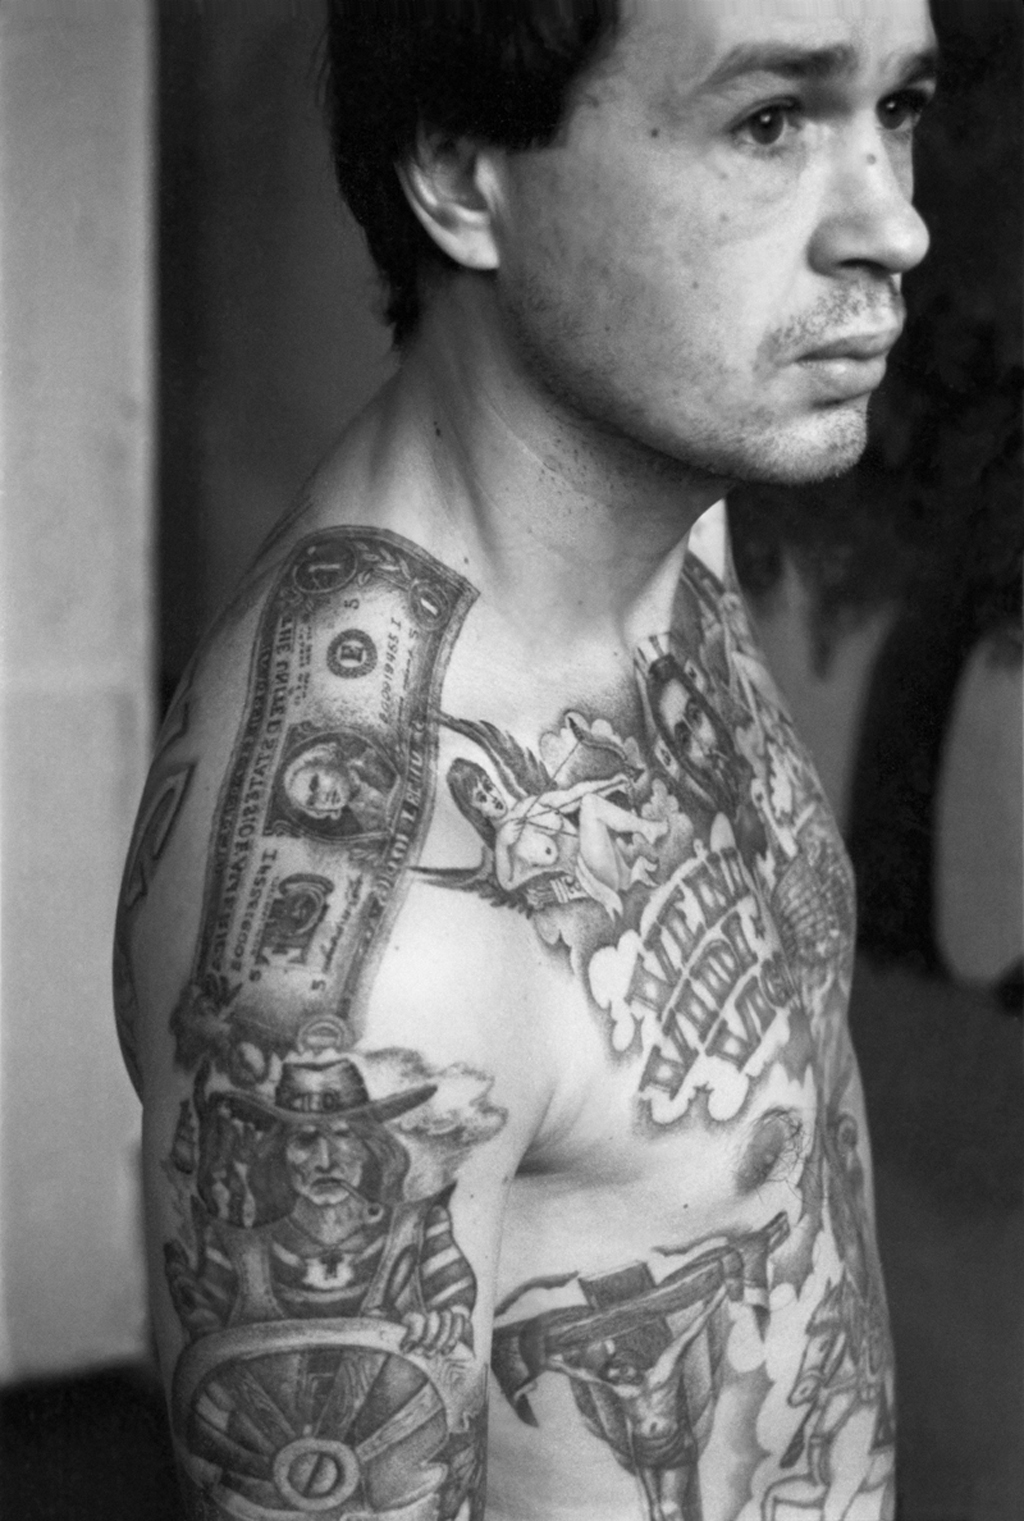 This convict’s tattoos were applied in the camps of the Urals where the tattoo artists produce work of exceptional quality. Because they were so highly regarded, criminals often attempted to be transferred there in order to be tattooed.